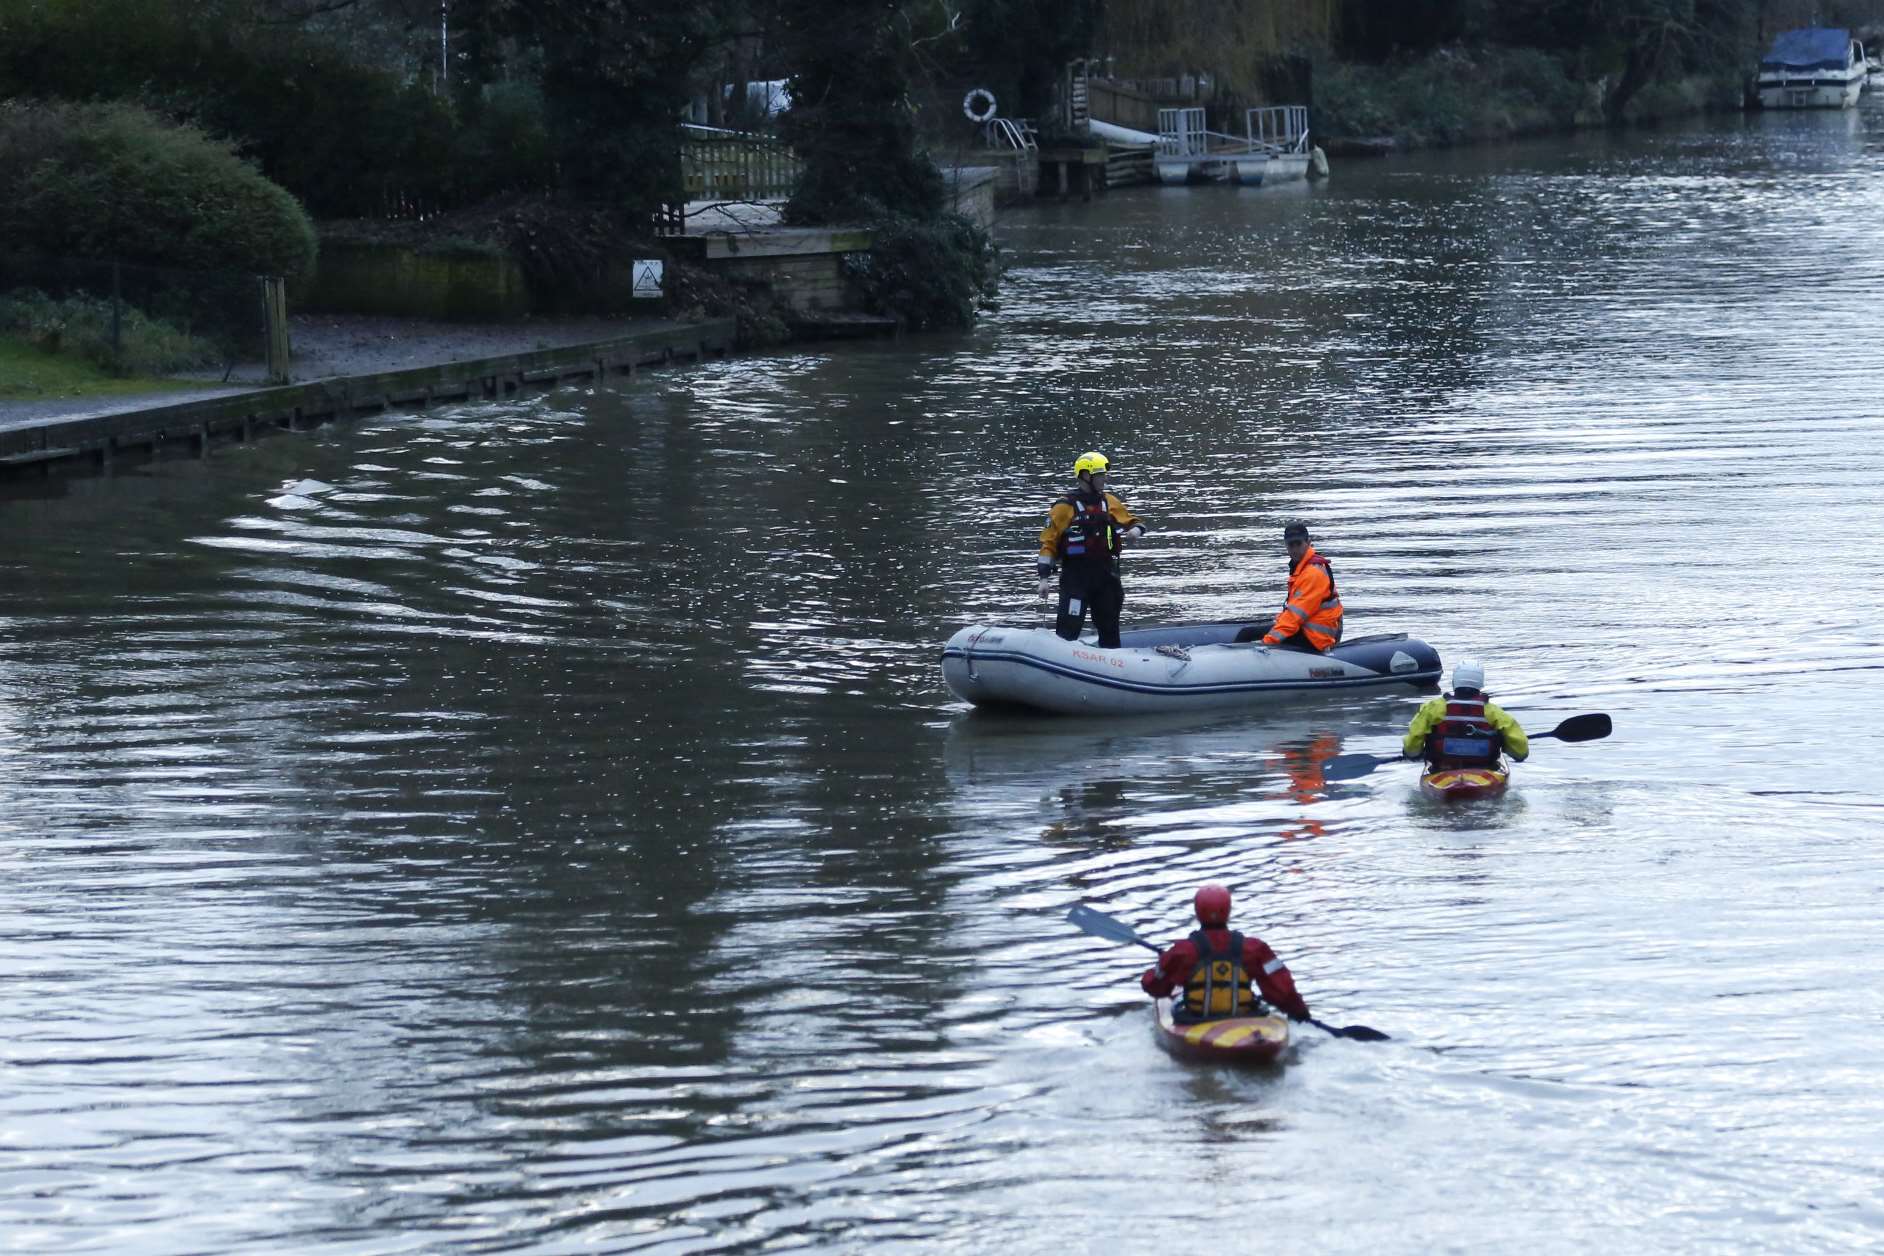 Kent Search and Rescue have been searching the River Medway since Mr Lamb's disappearance